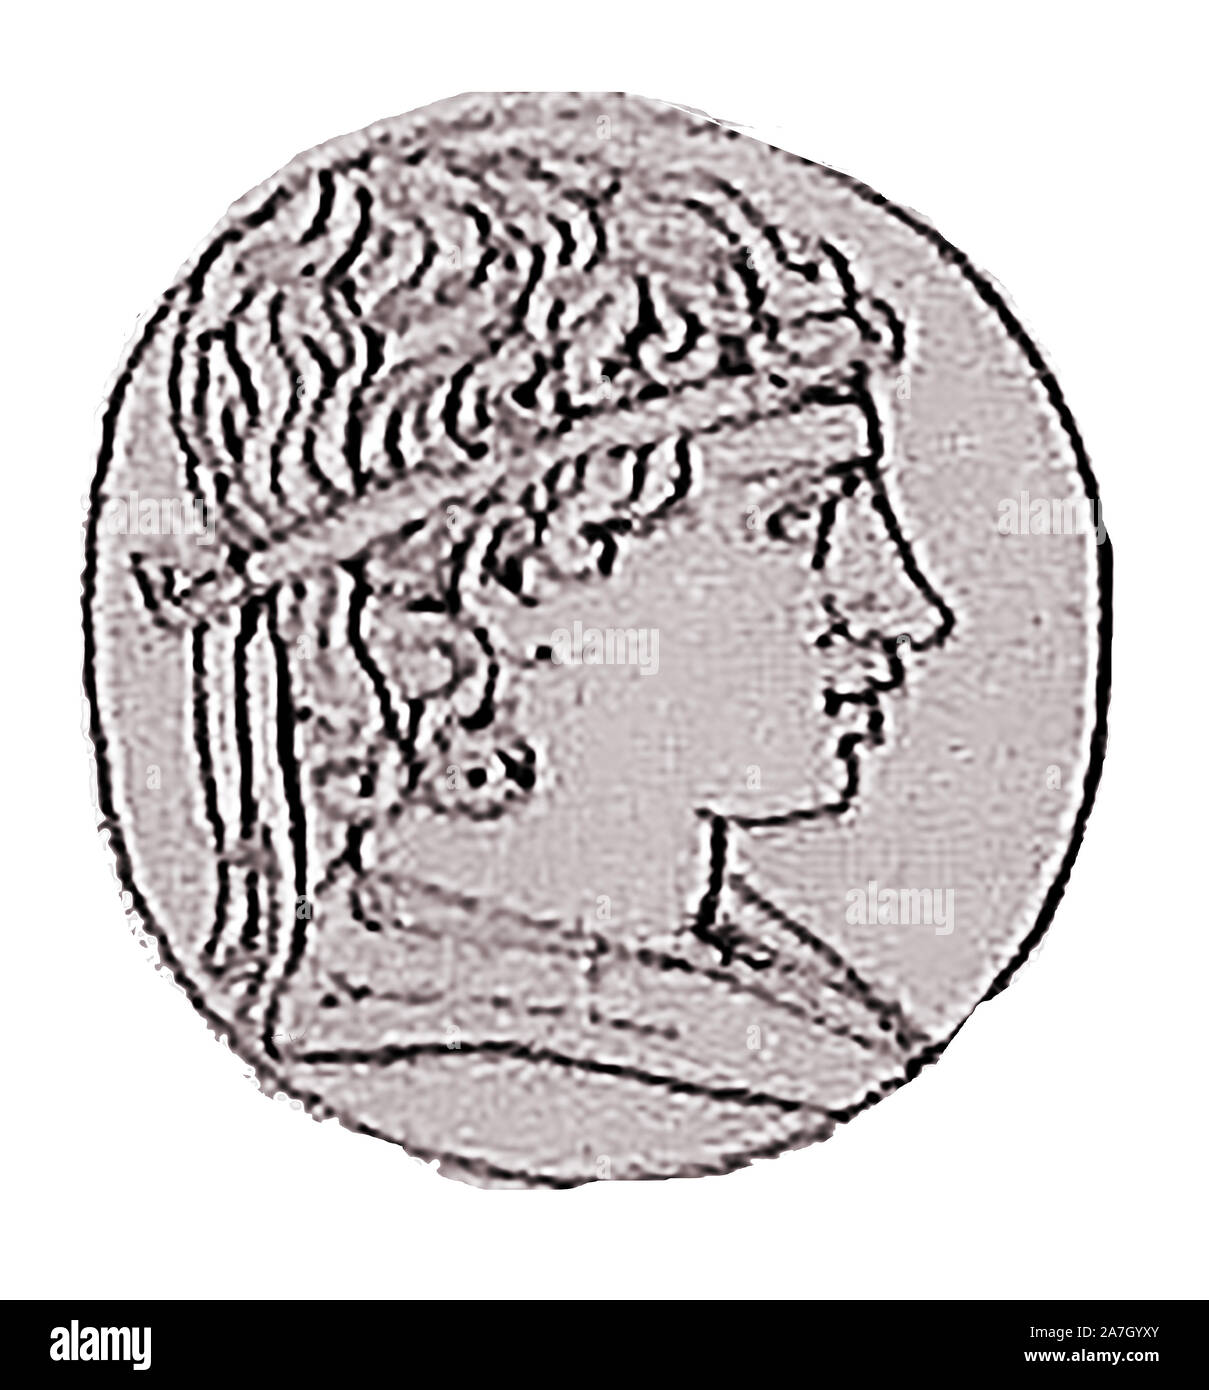 A coin portrait of King Juba II  (aka Luba)  of Numidia, (Mauretania) Africa, during the Roman ascendancy. His first wife was Cleopatra Selene II, daughter of the Greek Ptolemaic Queen Cleopatra VII of Egypt and  Mark Antony.When Juba II and Cleopatra Selene moved to Mauretania, they renamed their new capital Caesaria (now Cherchell, Algeria). Juba  was a prolific author  writing  in Greek and Latin about  history, natural history, geography, grammar, and the arts. Stock Photo